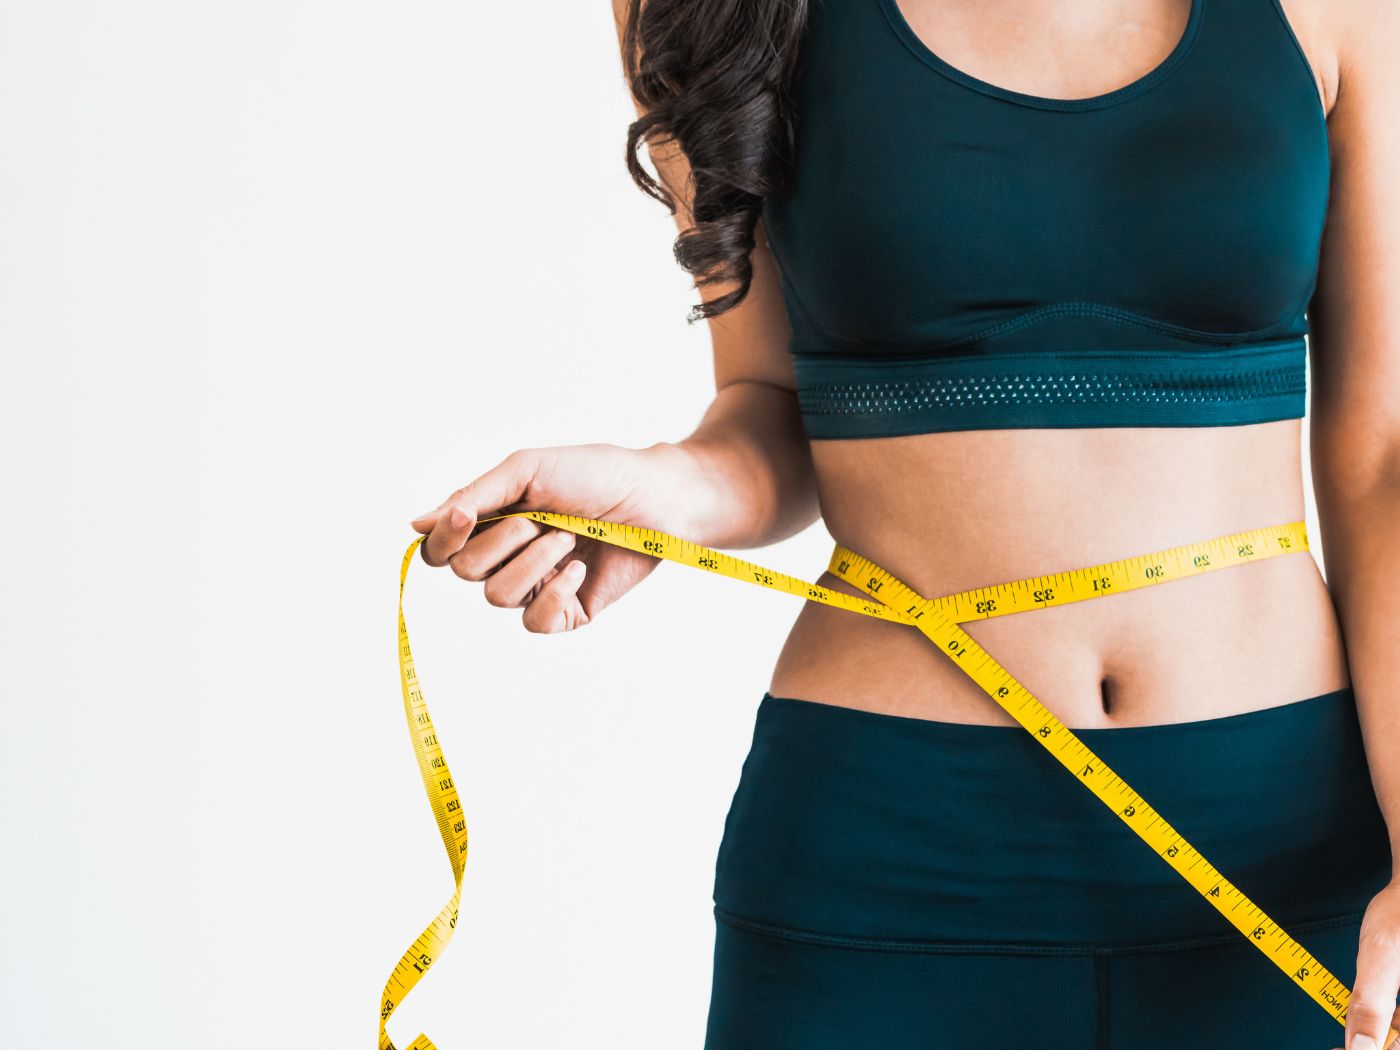 The Ultimate Guide: How To Lose Weight in 10 Days